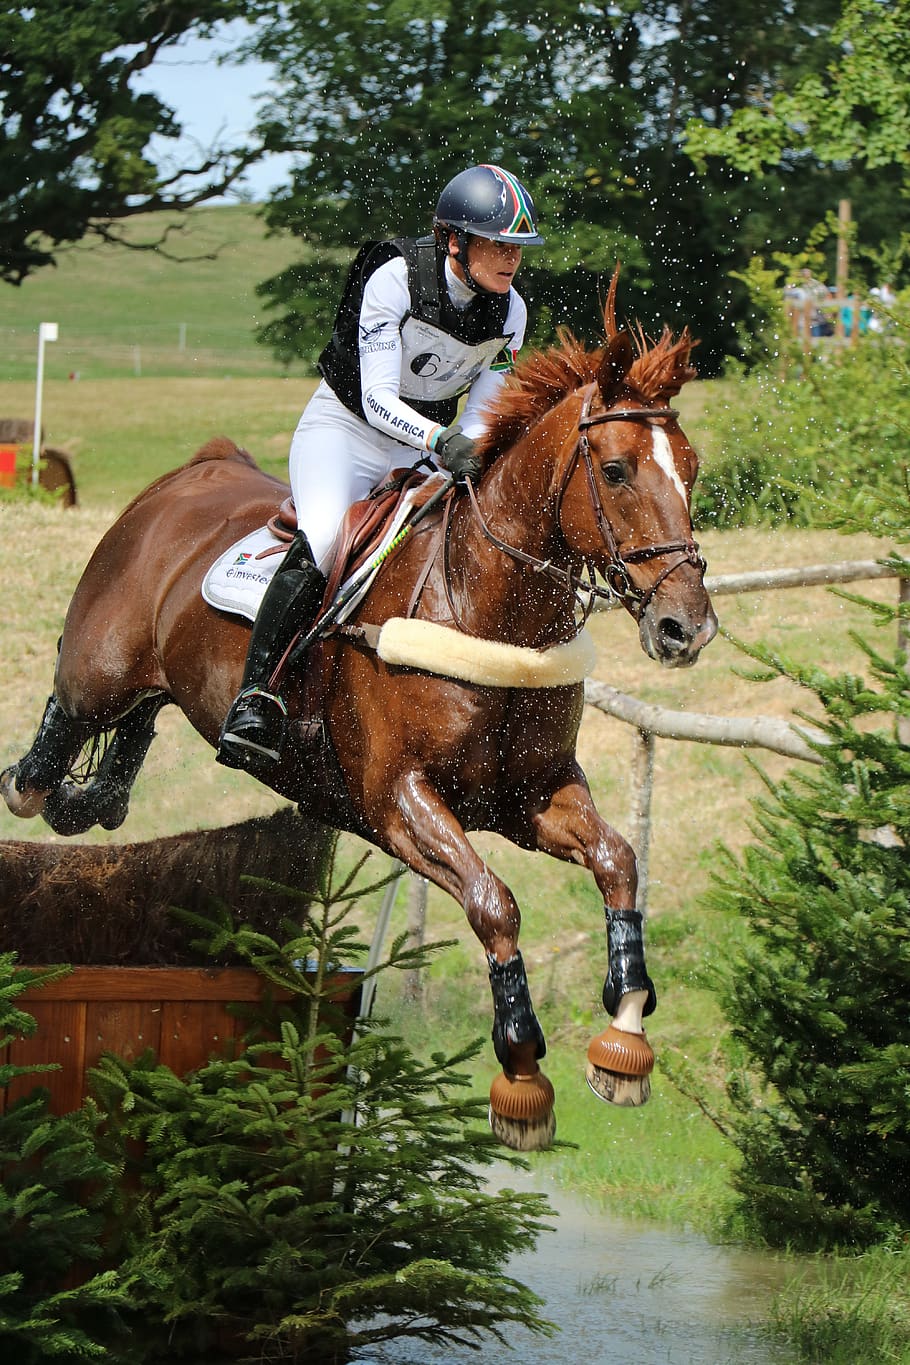 haras du pin, national stud, haras, great full, jumping, cross, horses, horse, competition, jumper